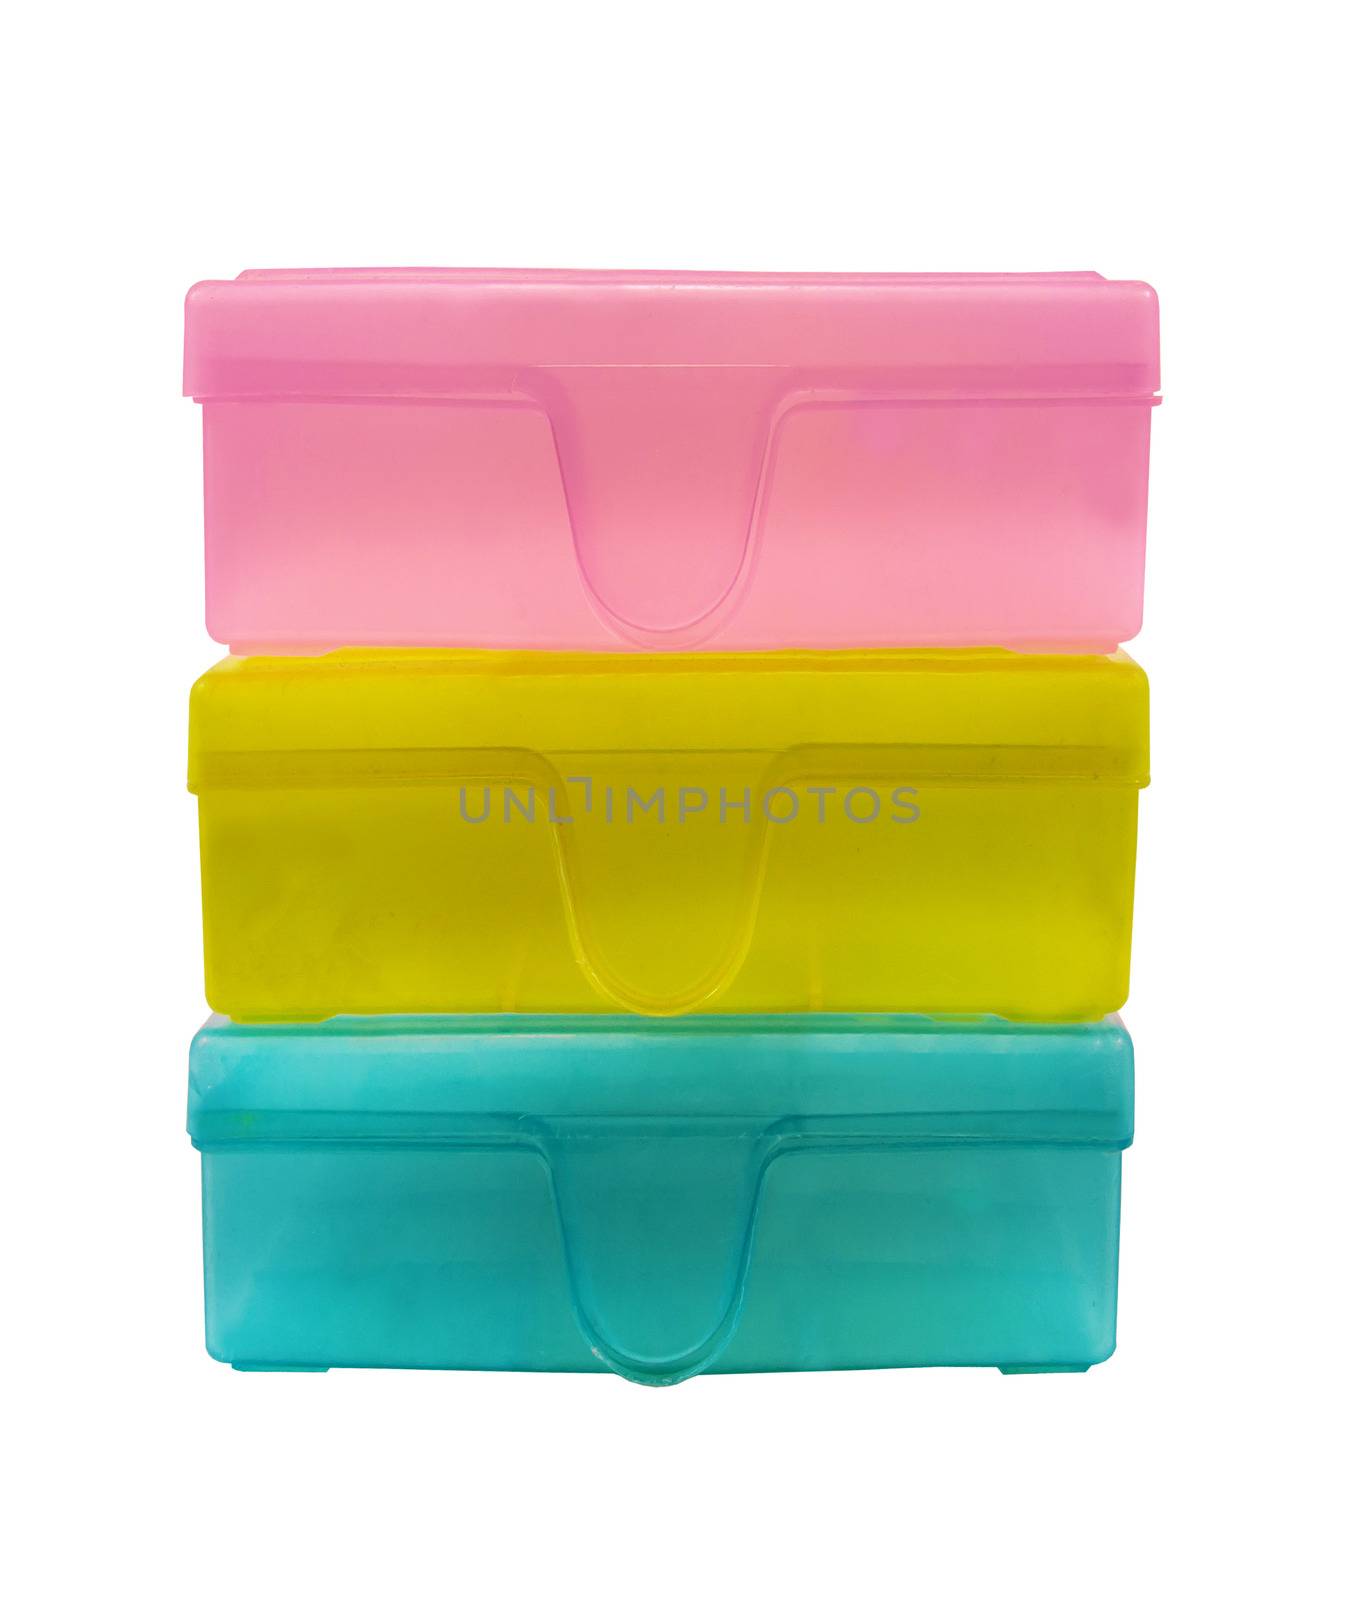 a pile of plastic containers on a white background by sutipp11